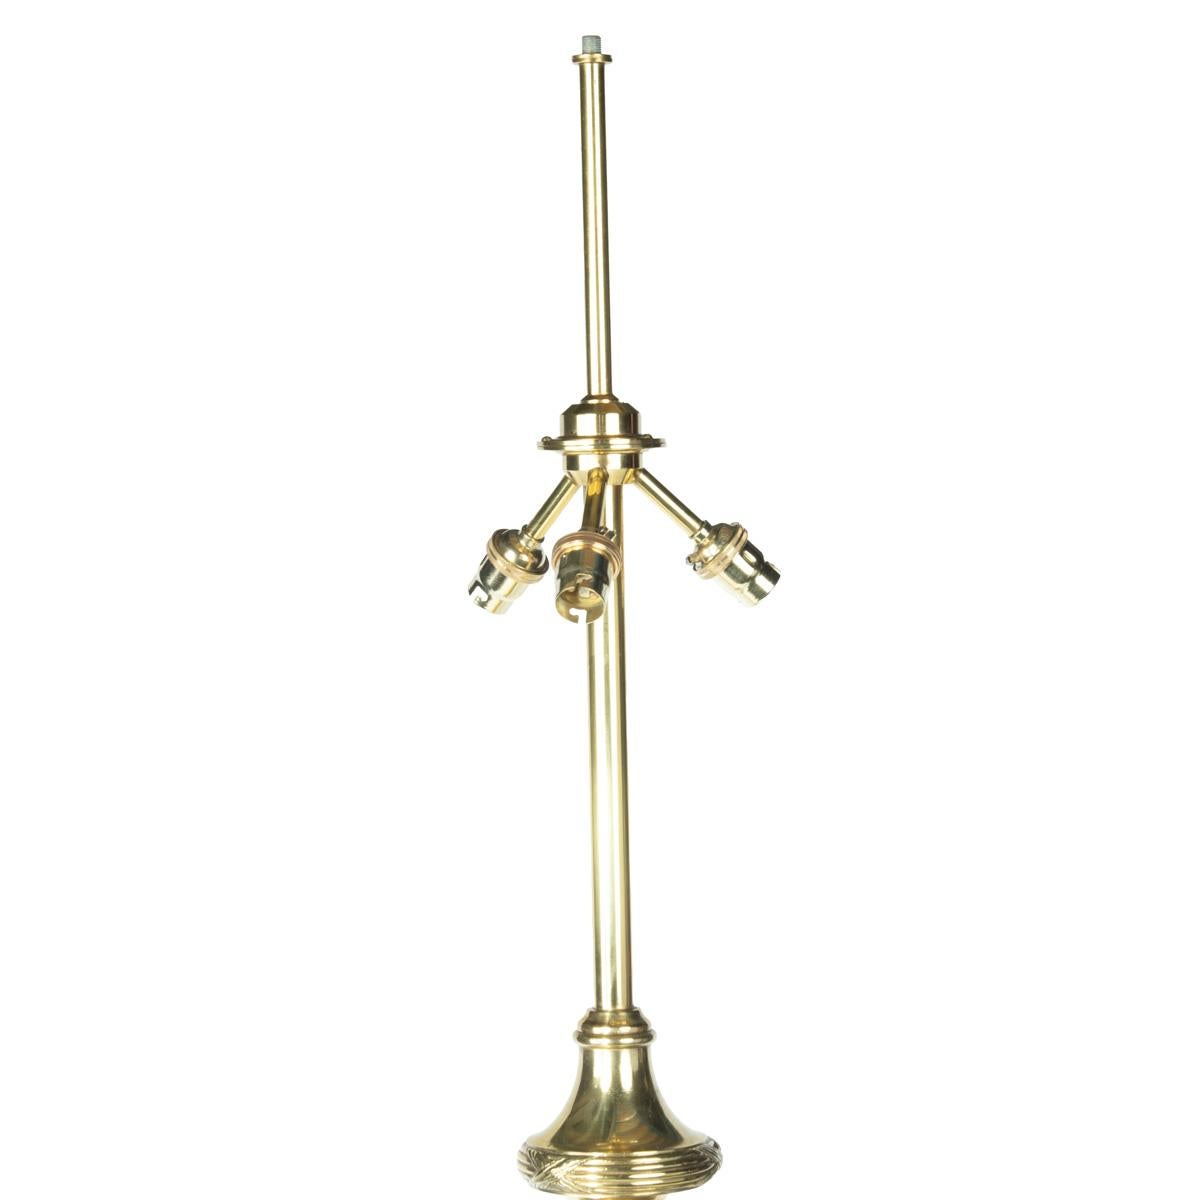 A pair of particularly fine quality French solid brass standard lamps, each with a tapering reeded support with acanthus bud end set on scrolling tripod feet.  French circa 1890.

